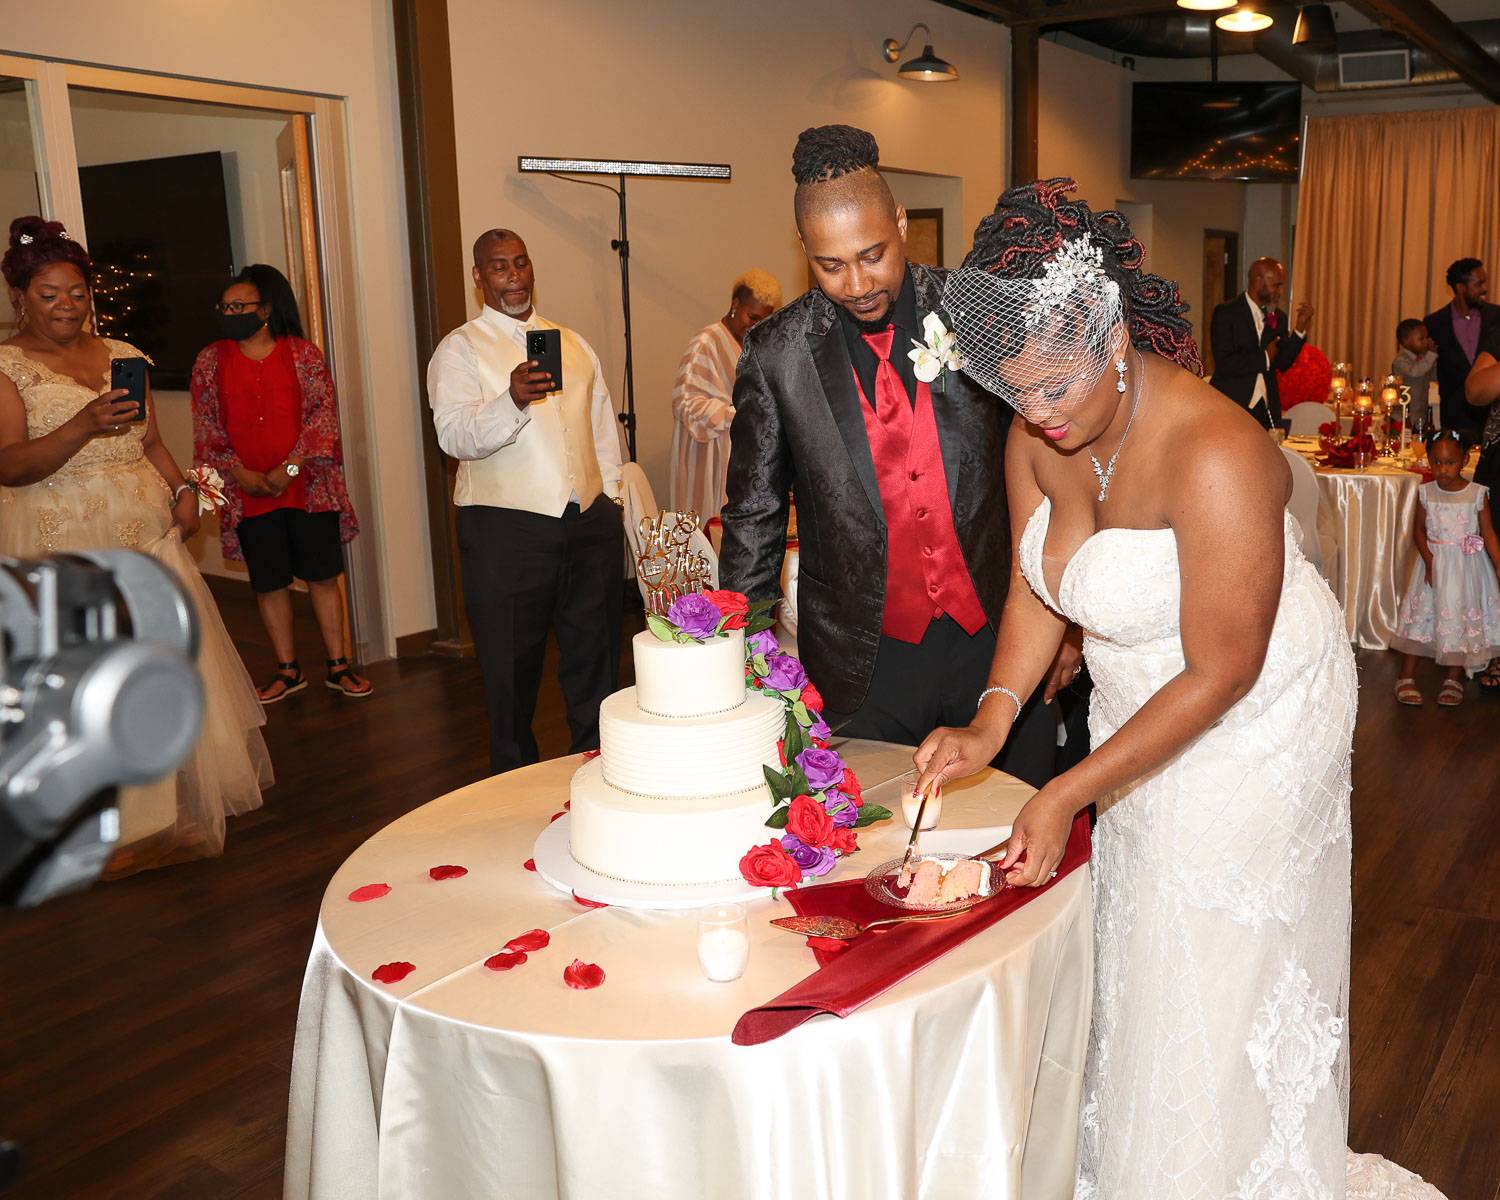 The bride putting two cake slices on the plate